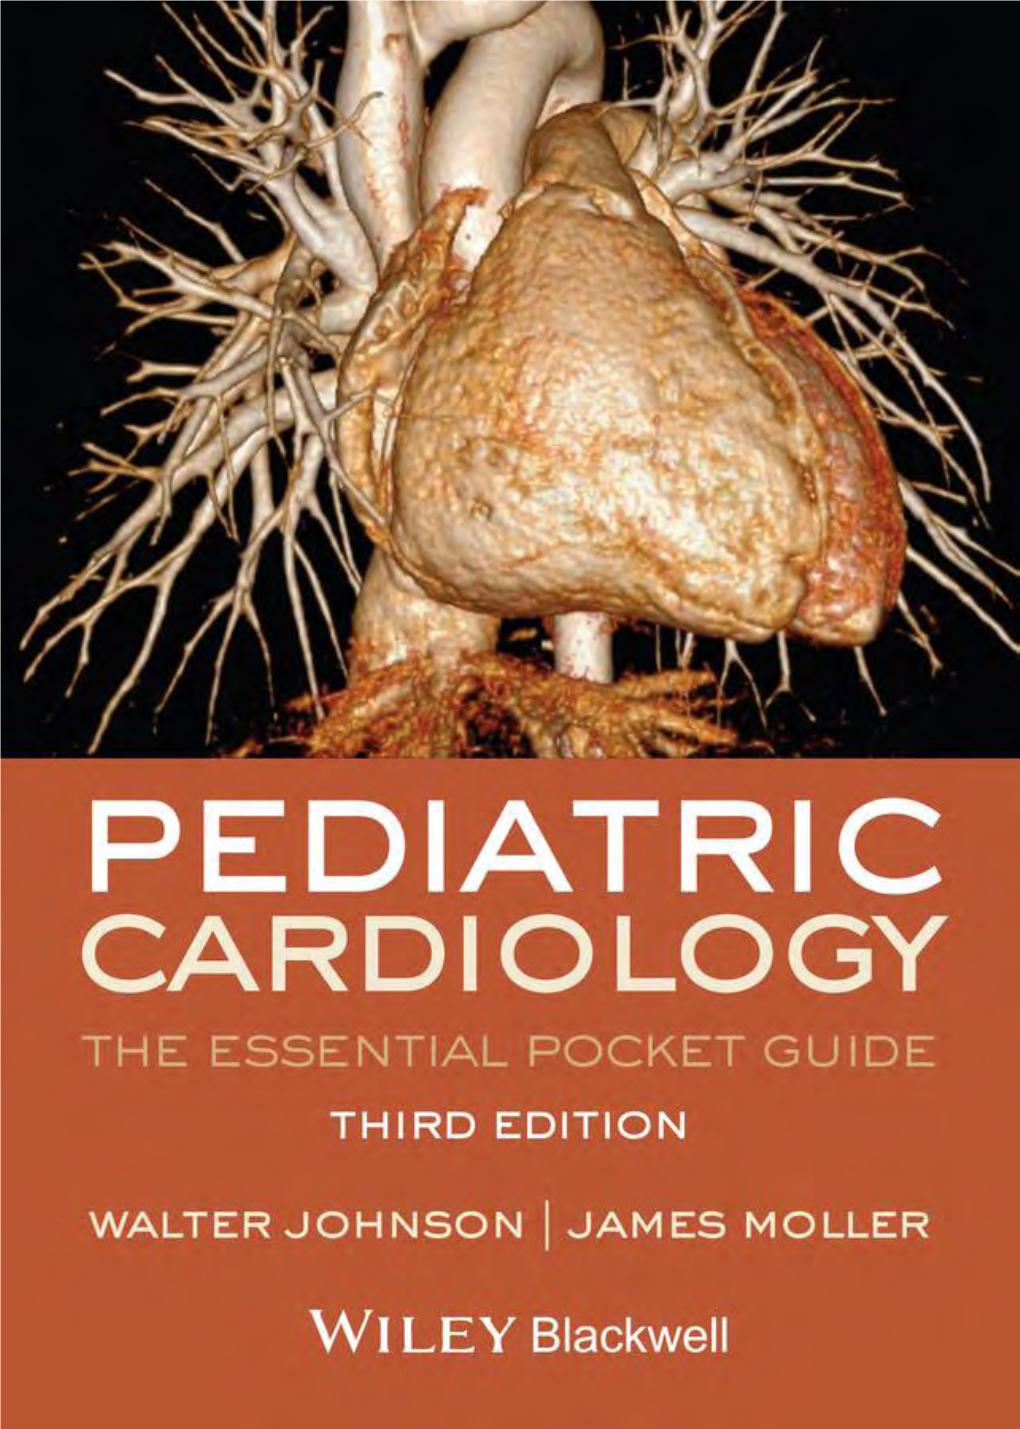 Pediatric Cardiology: the Essential Pocket Guide, Third Edition